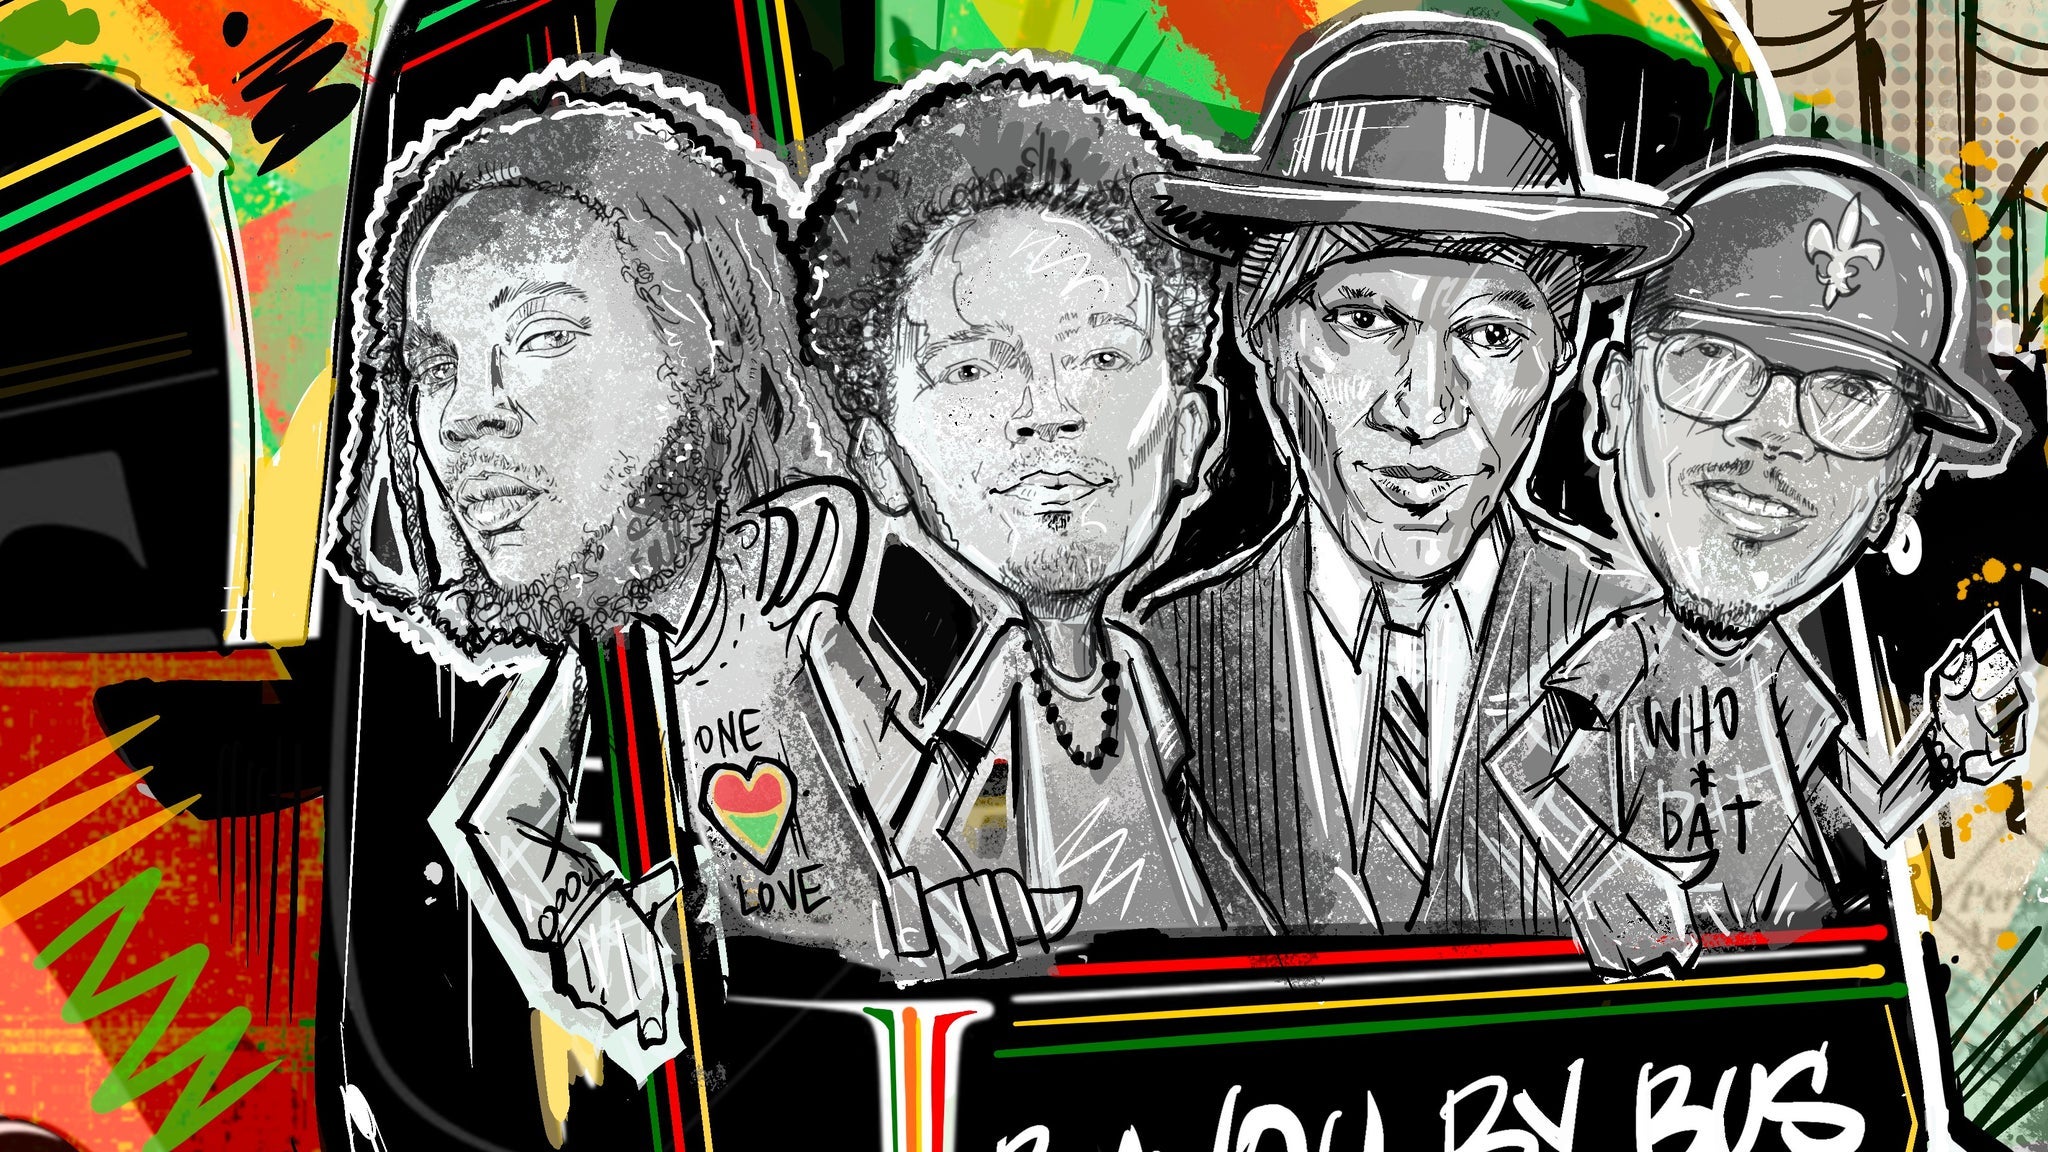 The Nevilles present Bayou By Bus with special guest Stephen Marley in New Orleans promo photo for Civic presale offer code